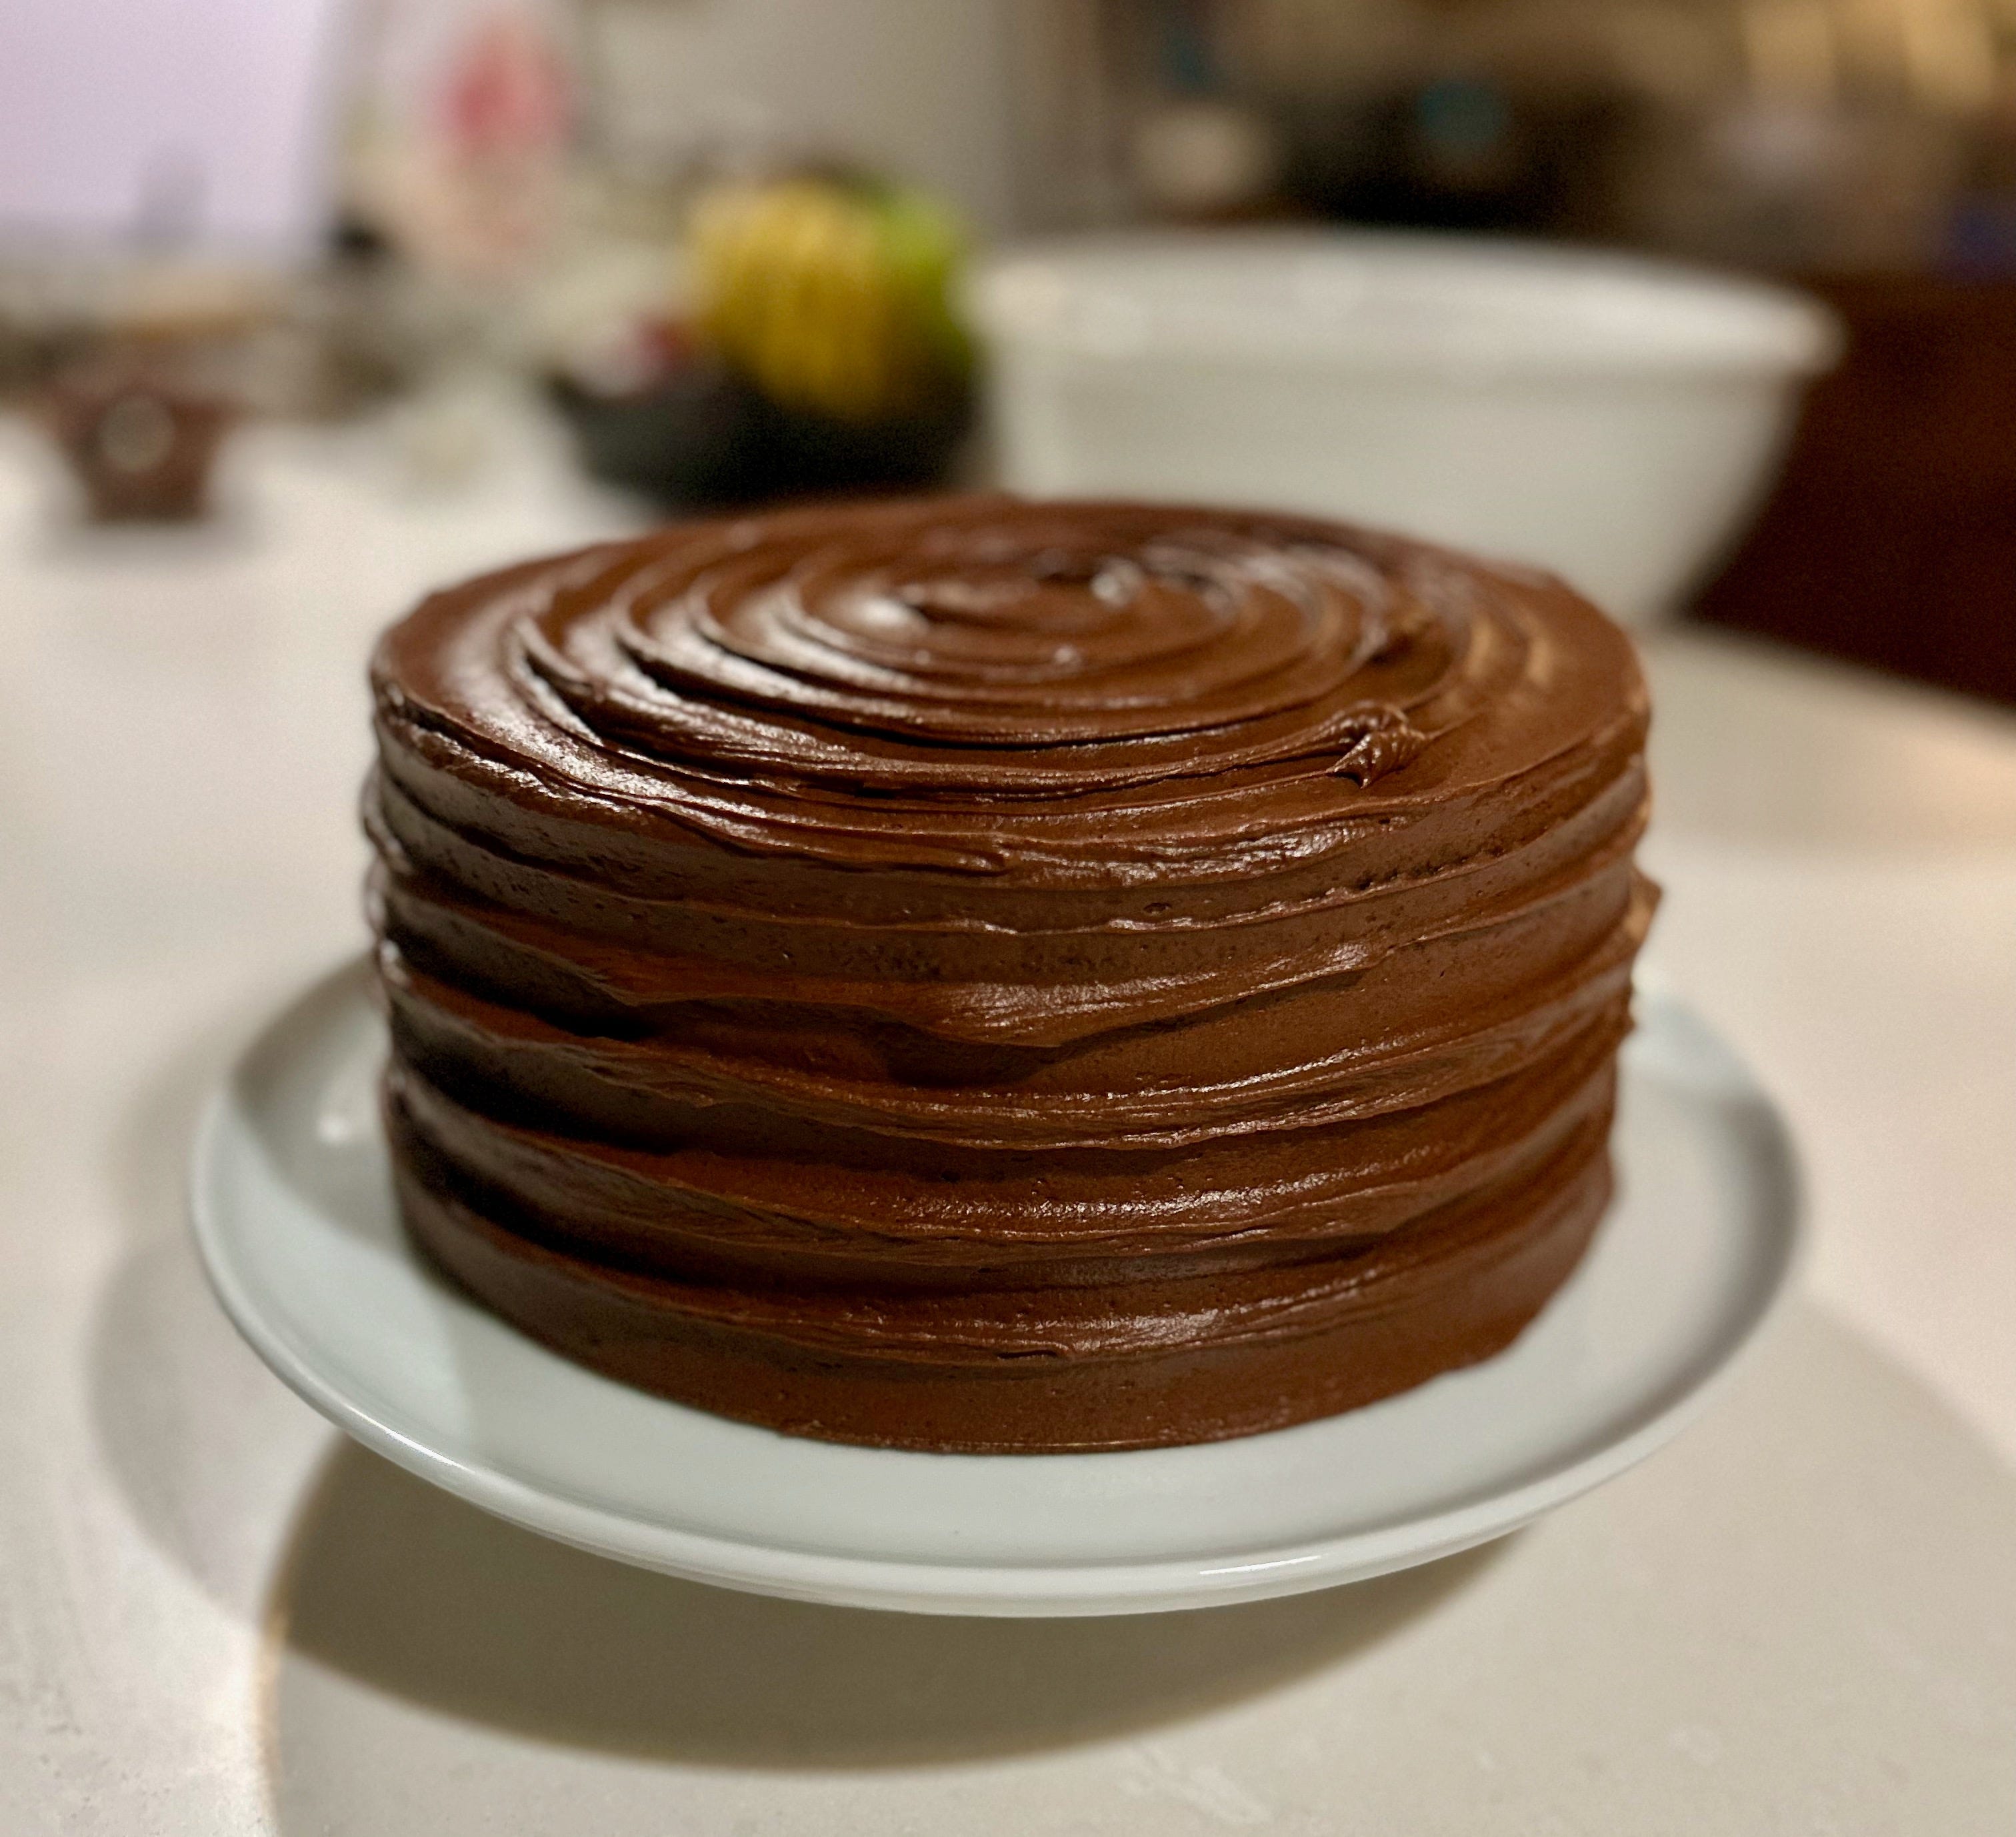 Peanut Butter-Chocolate Marble Cake - Bake from Scratch